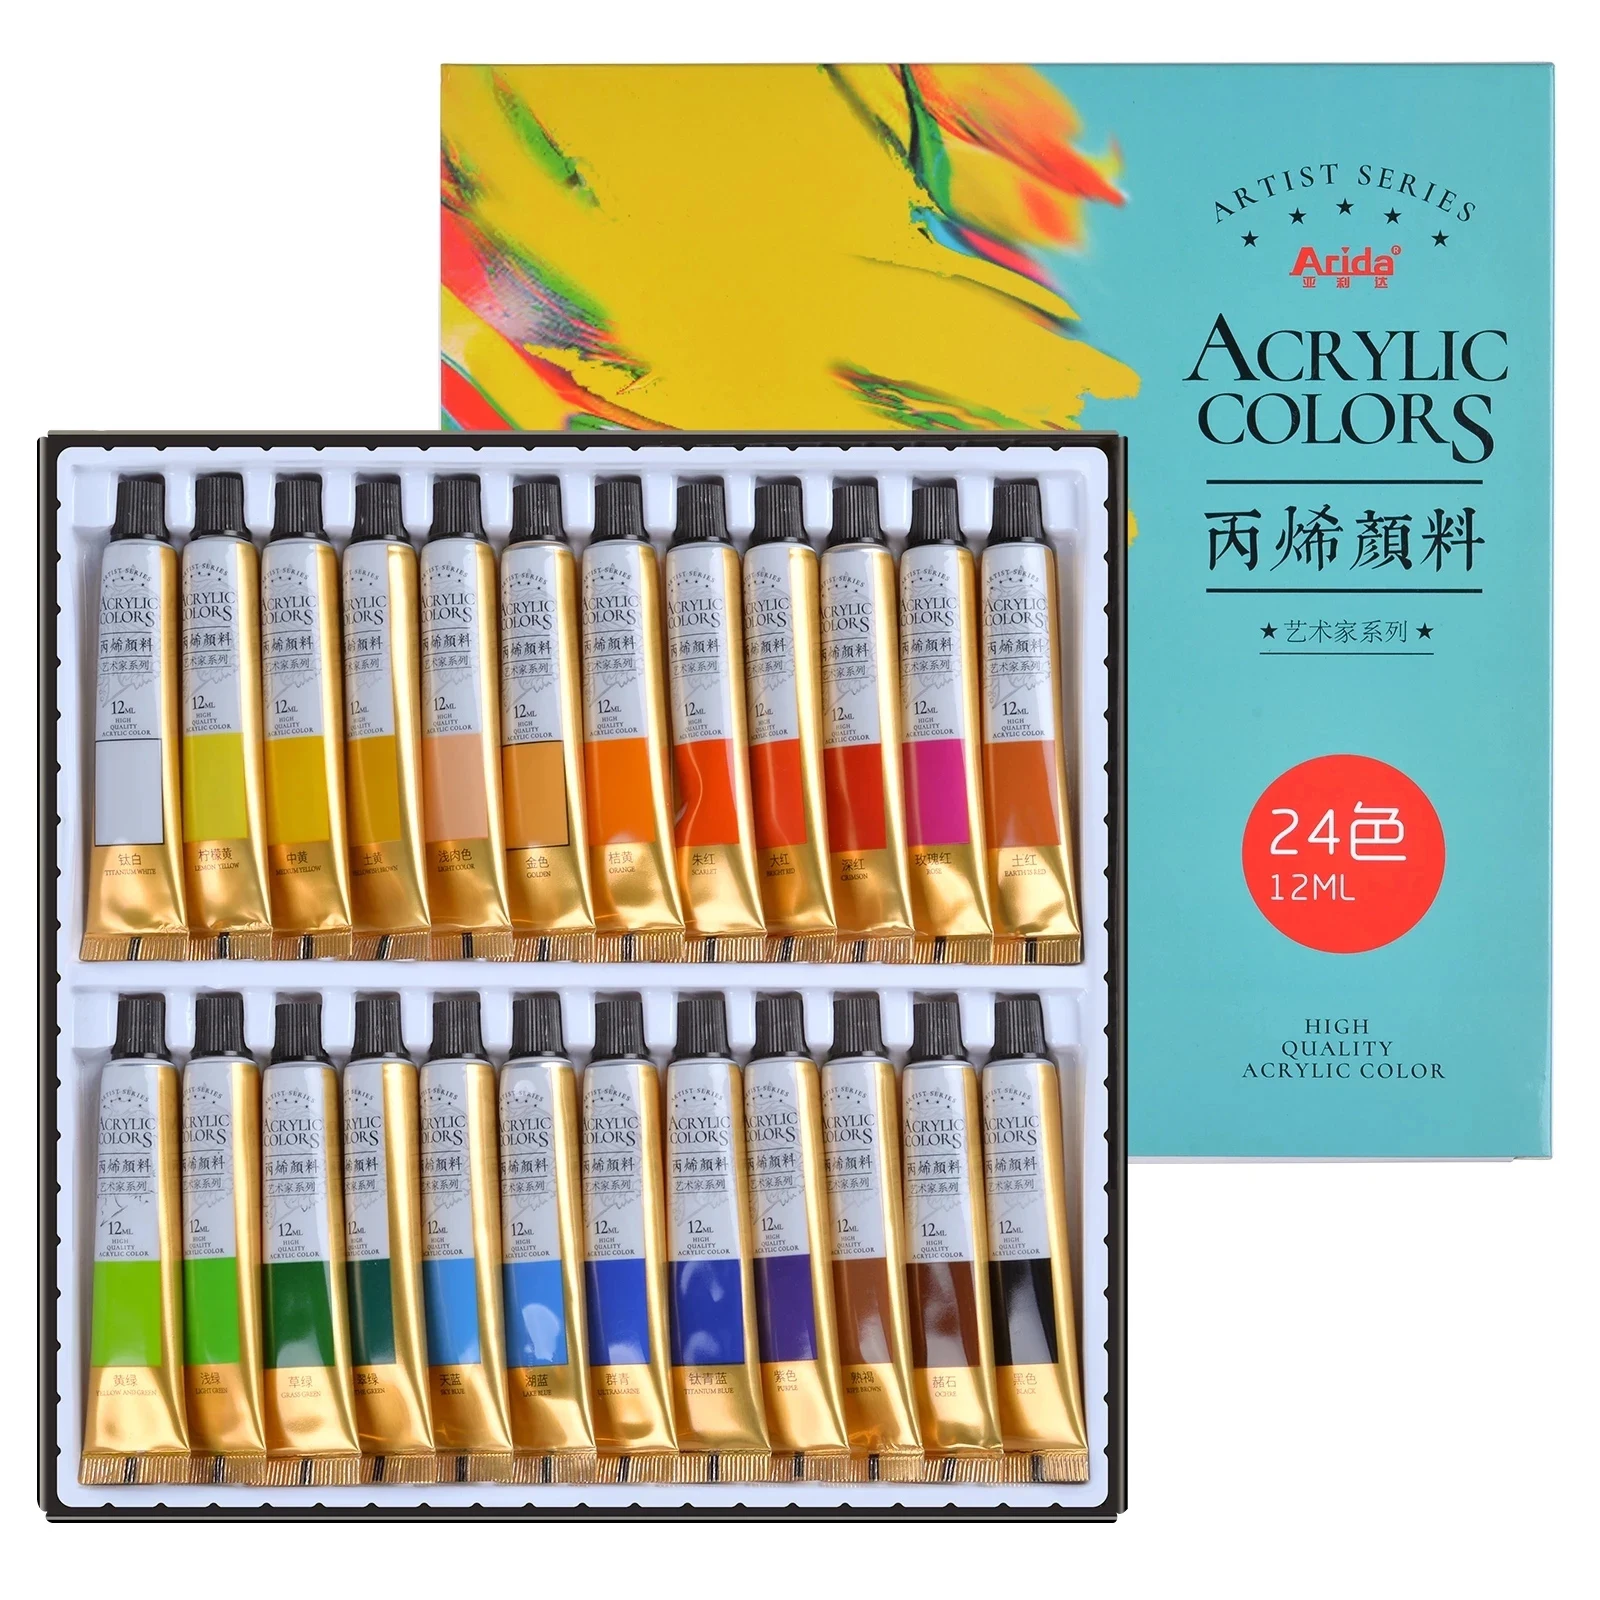 https://ae01.alicdn.com/kf/S979455ae658b4d77bfcd0f994d4514ed7/Professional-Acrylic-Paint-Set-12-18-24-Colors-12ml-Tubes-Drawing-Painting-Pigment-Used-in-Arts.jpg